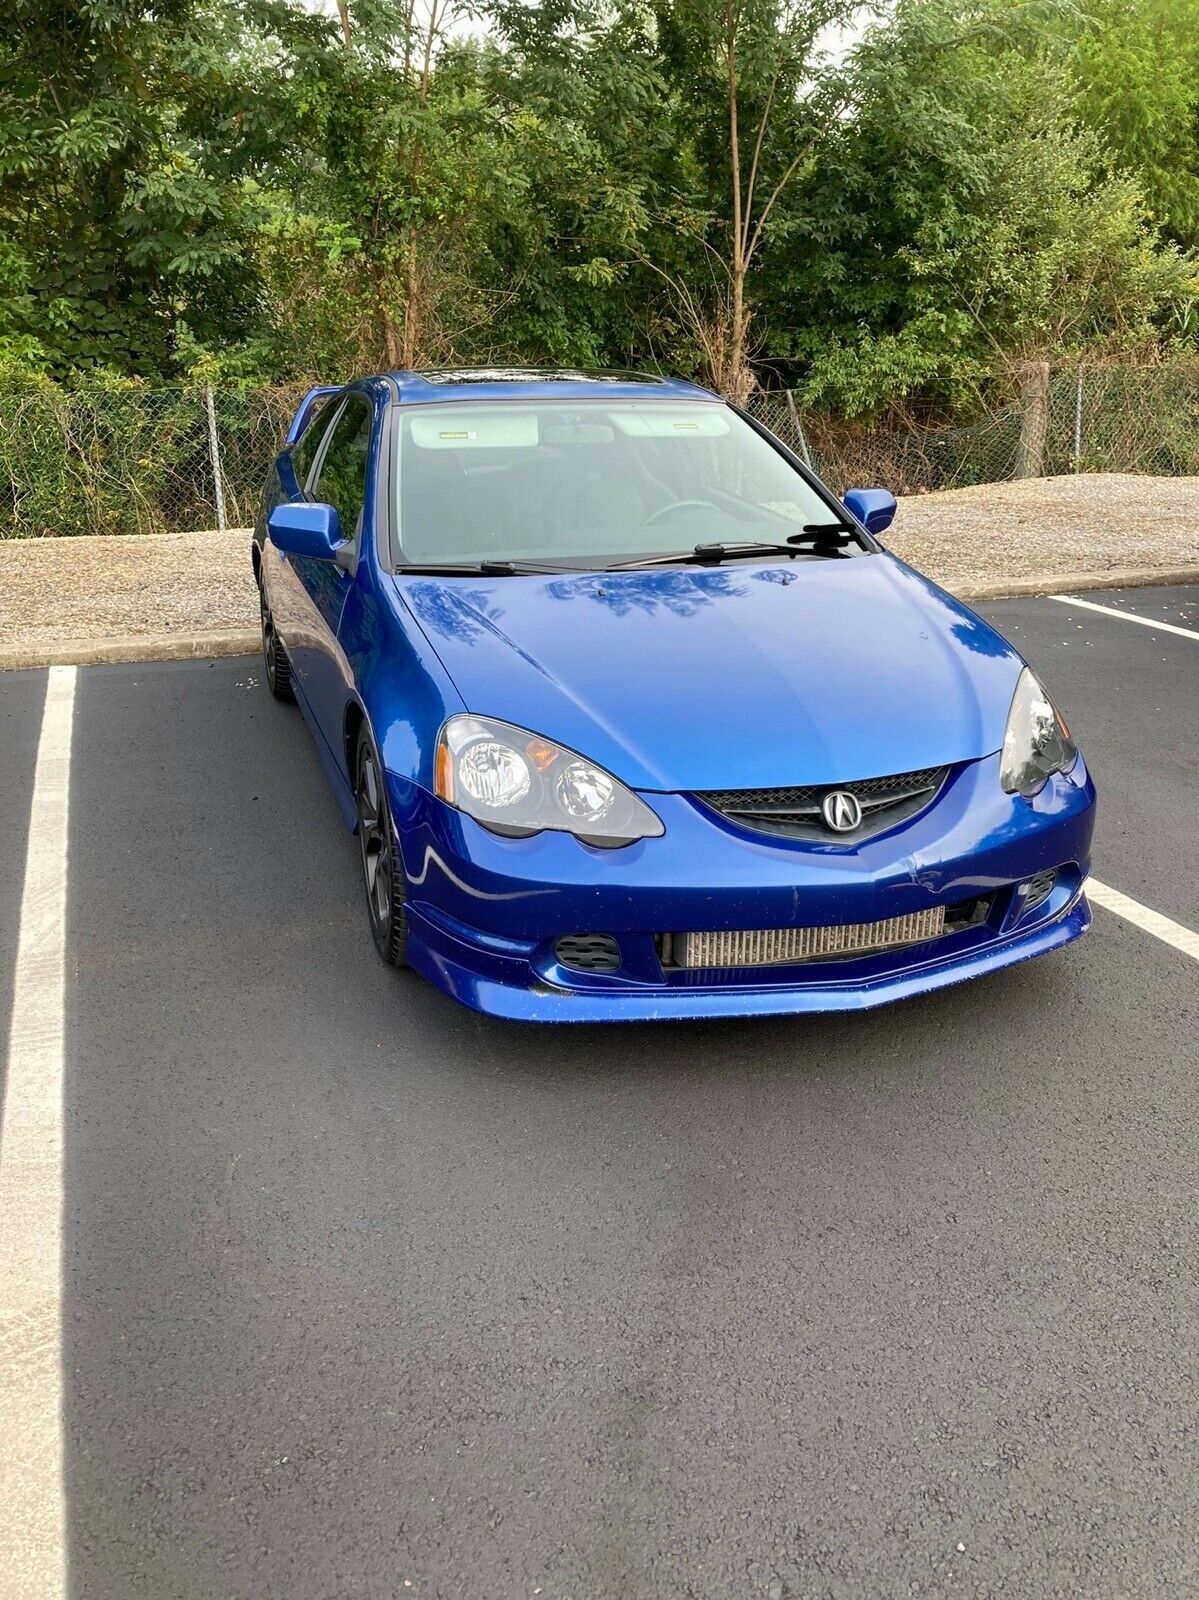 2002 Acura RSX TYPE-S 2002 Acura RSX Coupe Blue FWD Manual TYPE-S